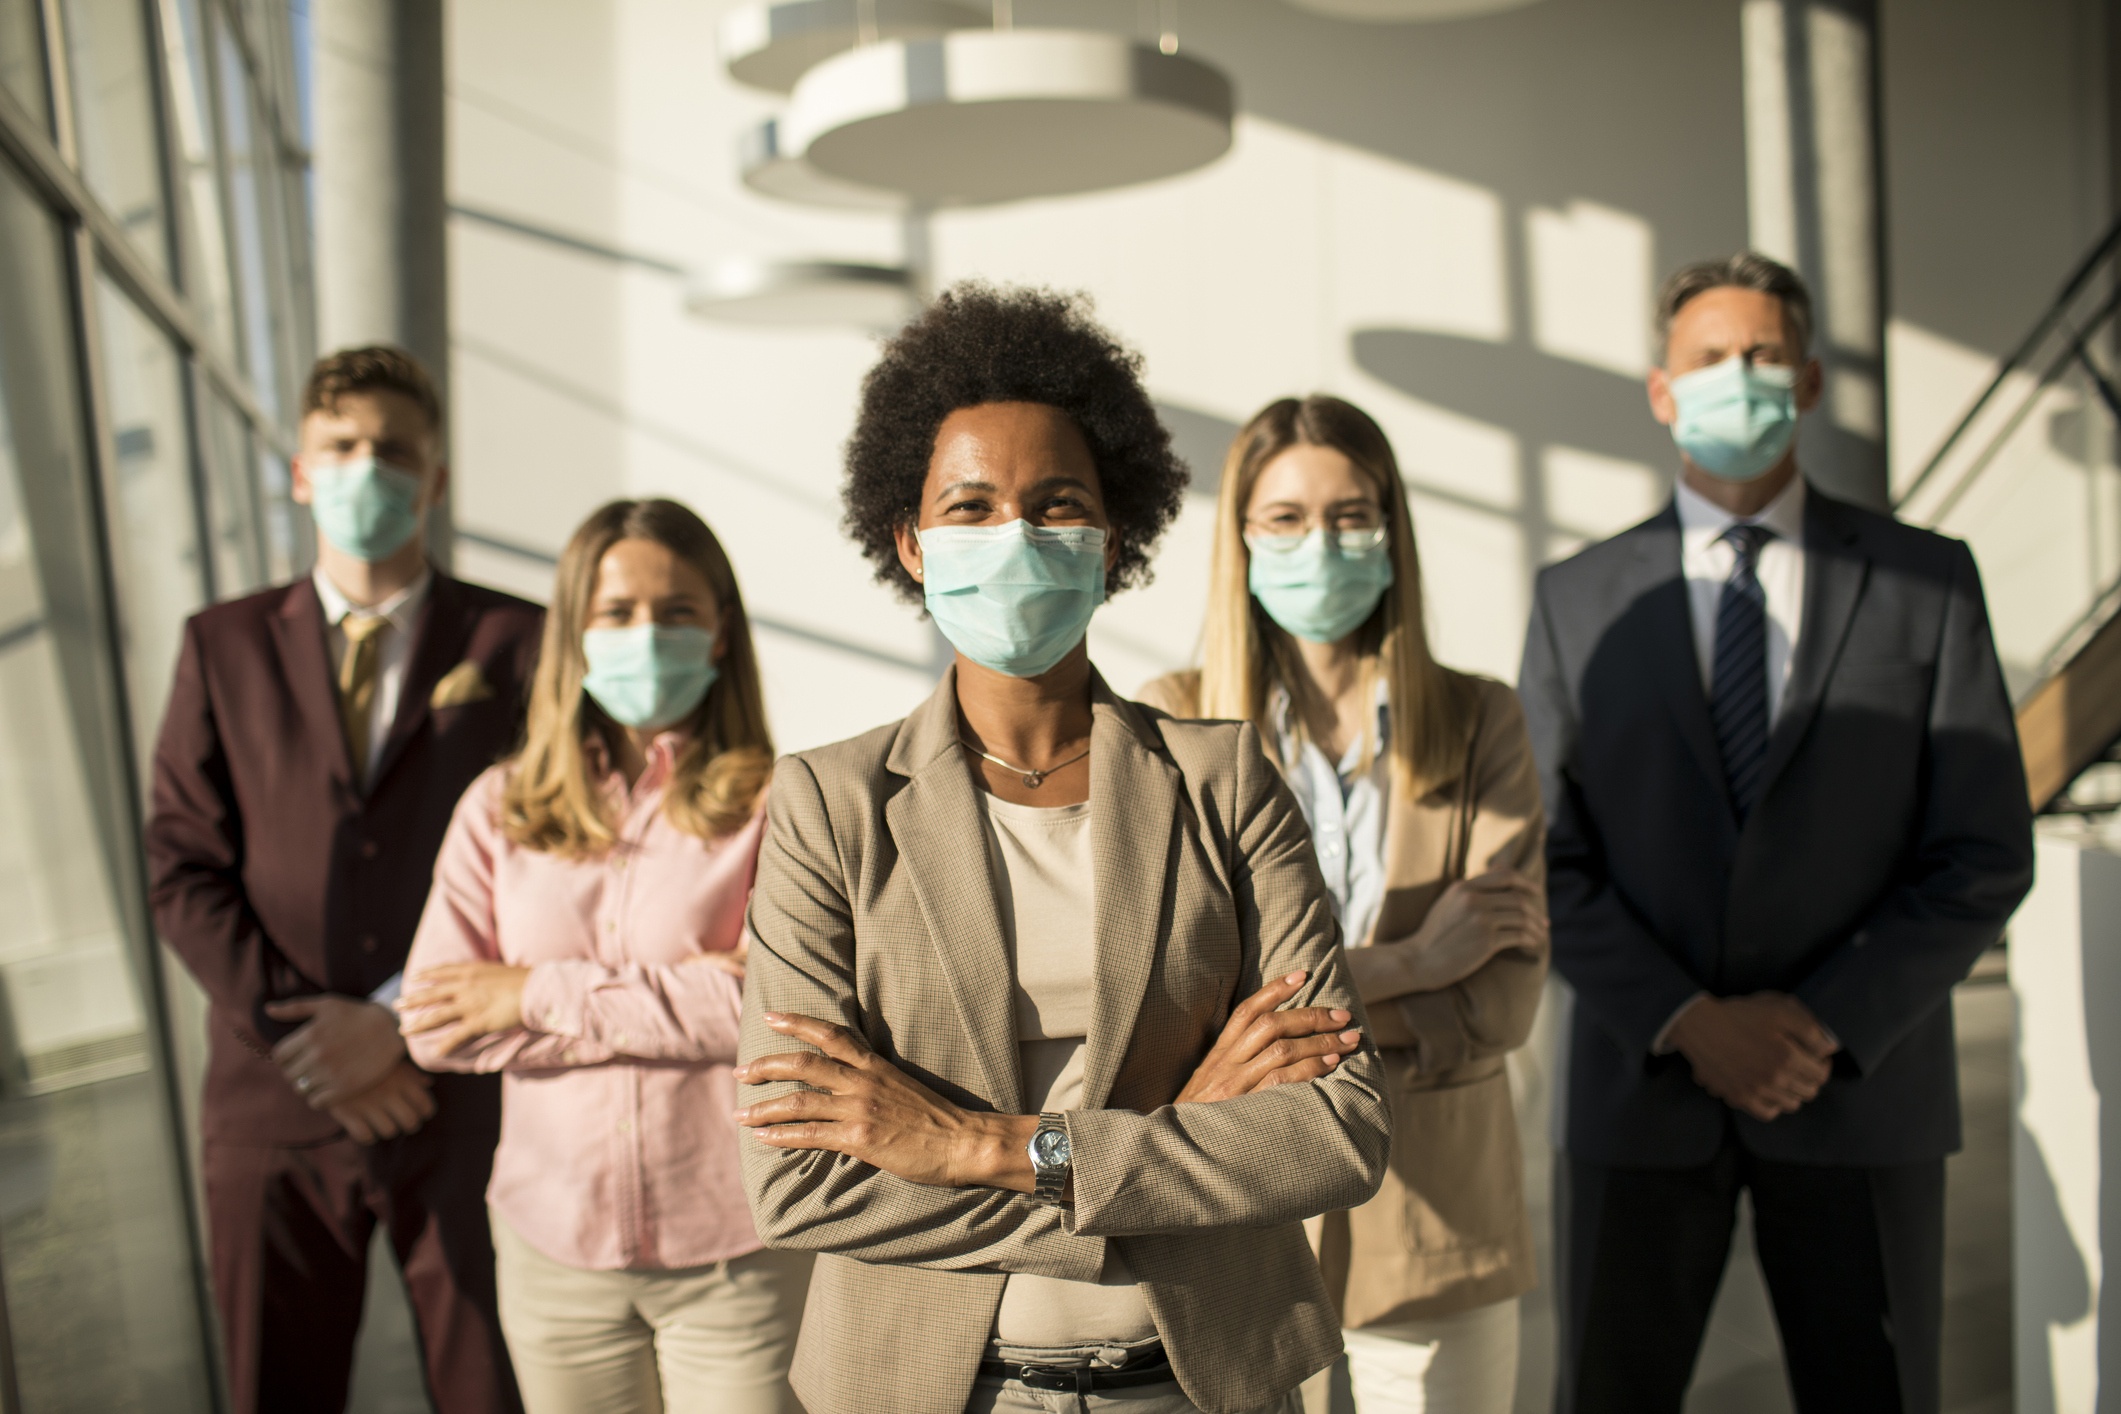 Group of people with facemasks showing leadership, image of new podcast episode about personal agency, collective action and the new normal with Paul Napper & Aaron Dignan